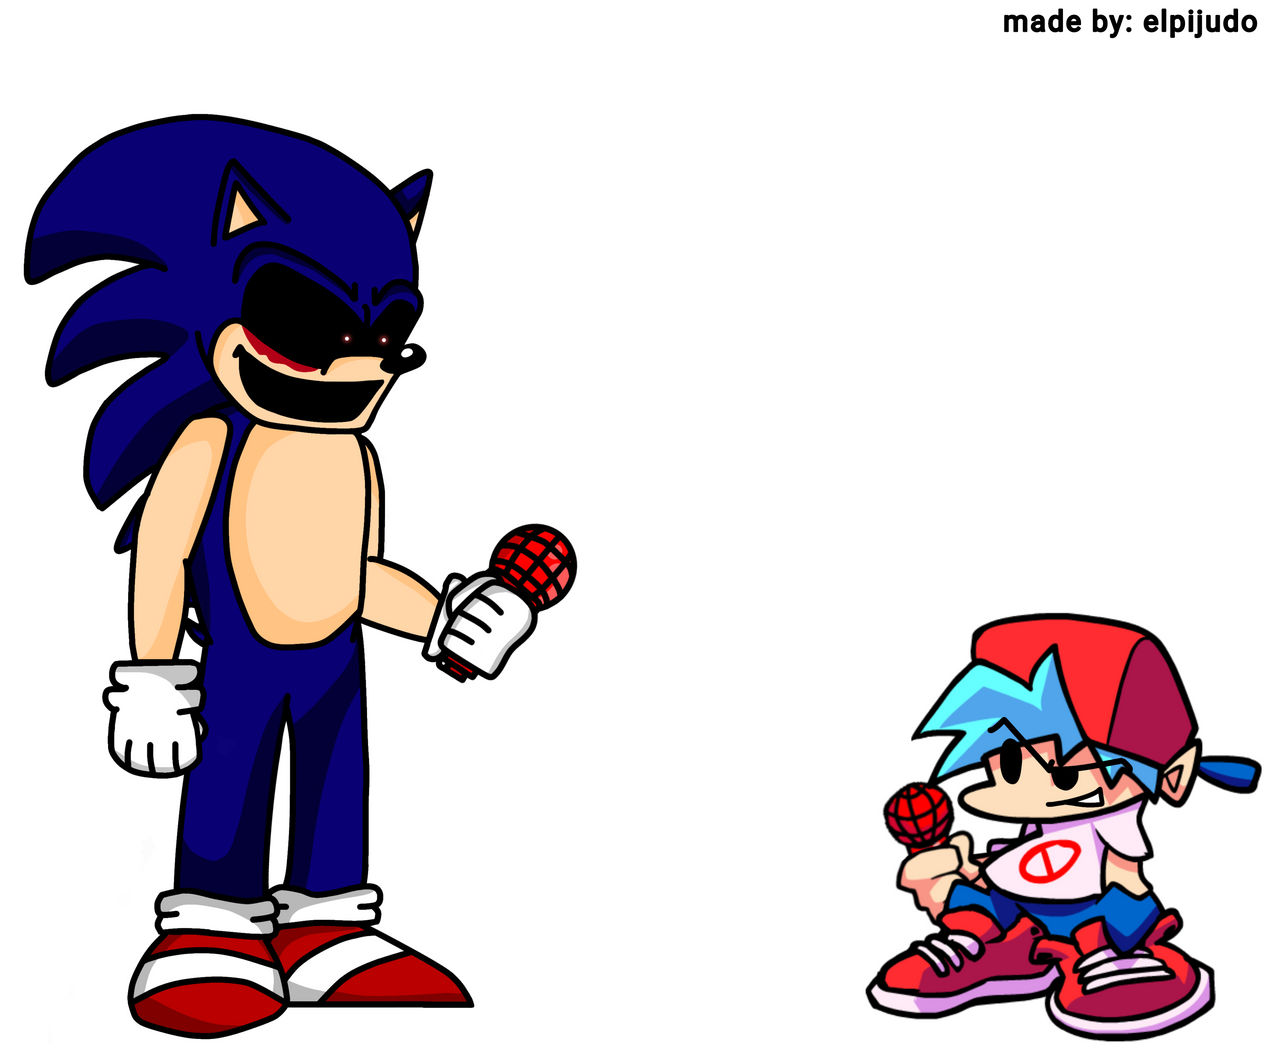 Sonic.exe [phase 2] by sonic54210 on DeviantArt